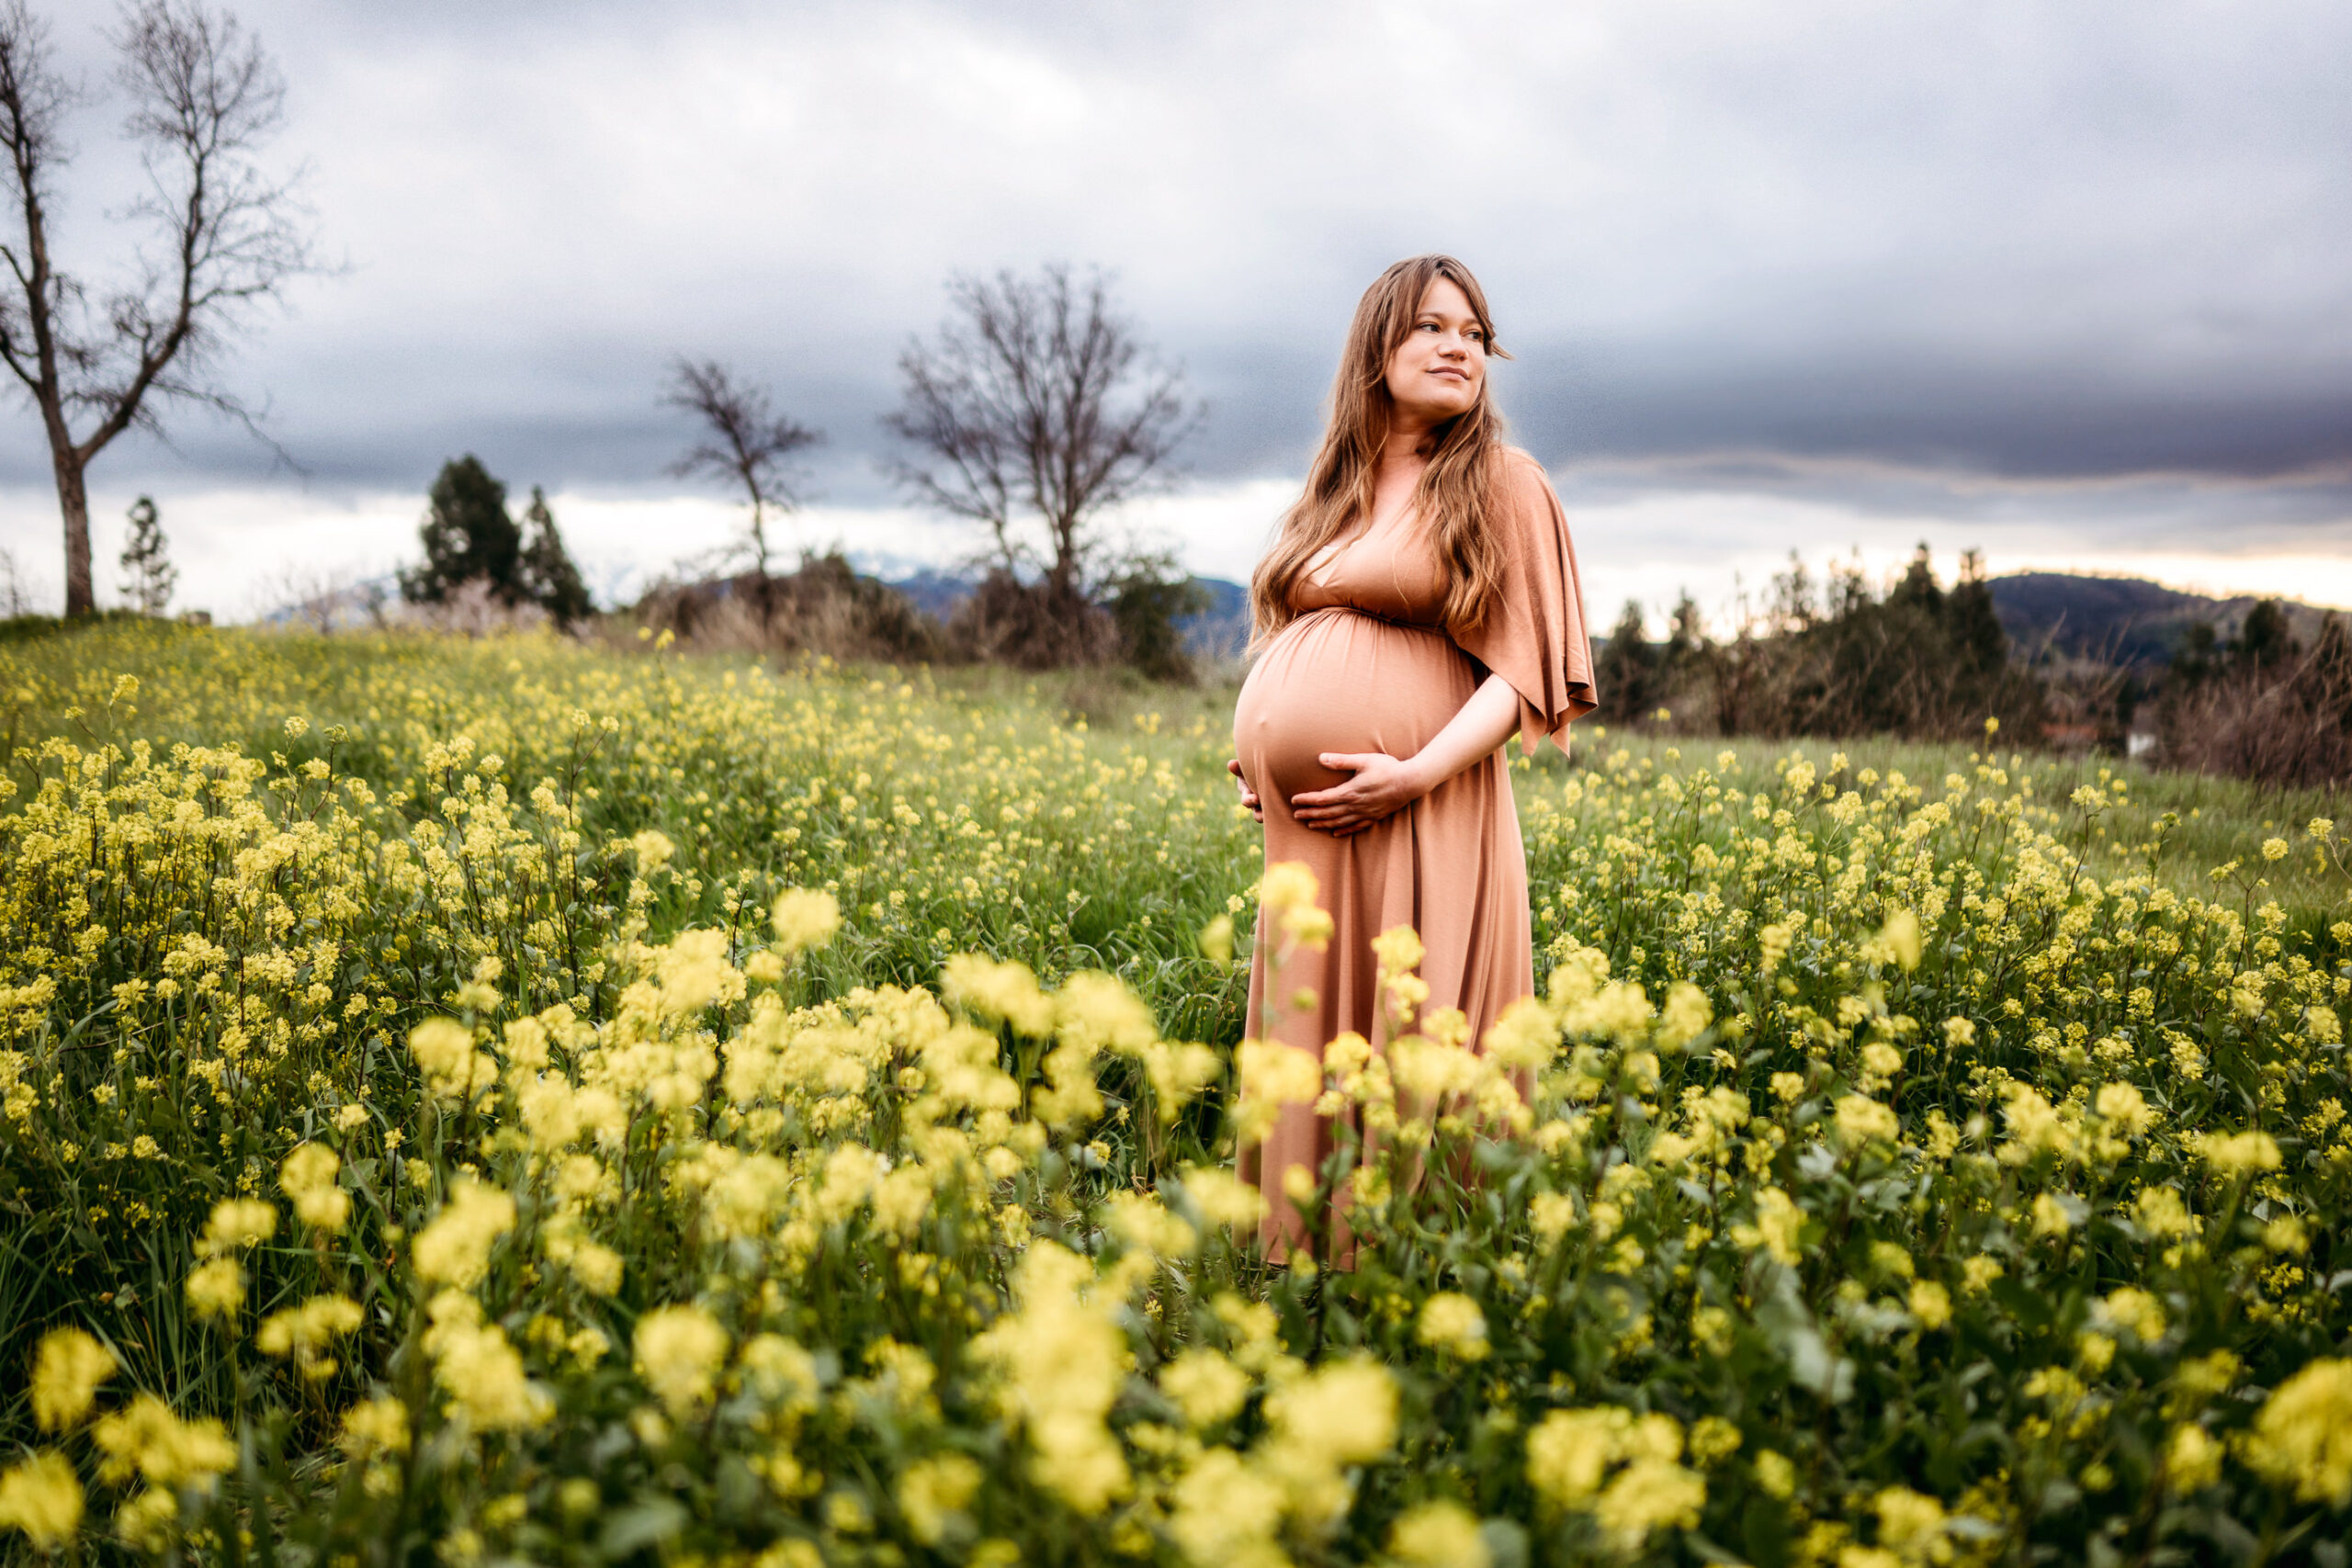 mom in salmon maternity dress stands in a field of yellow wildflowers